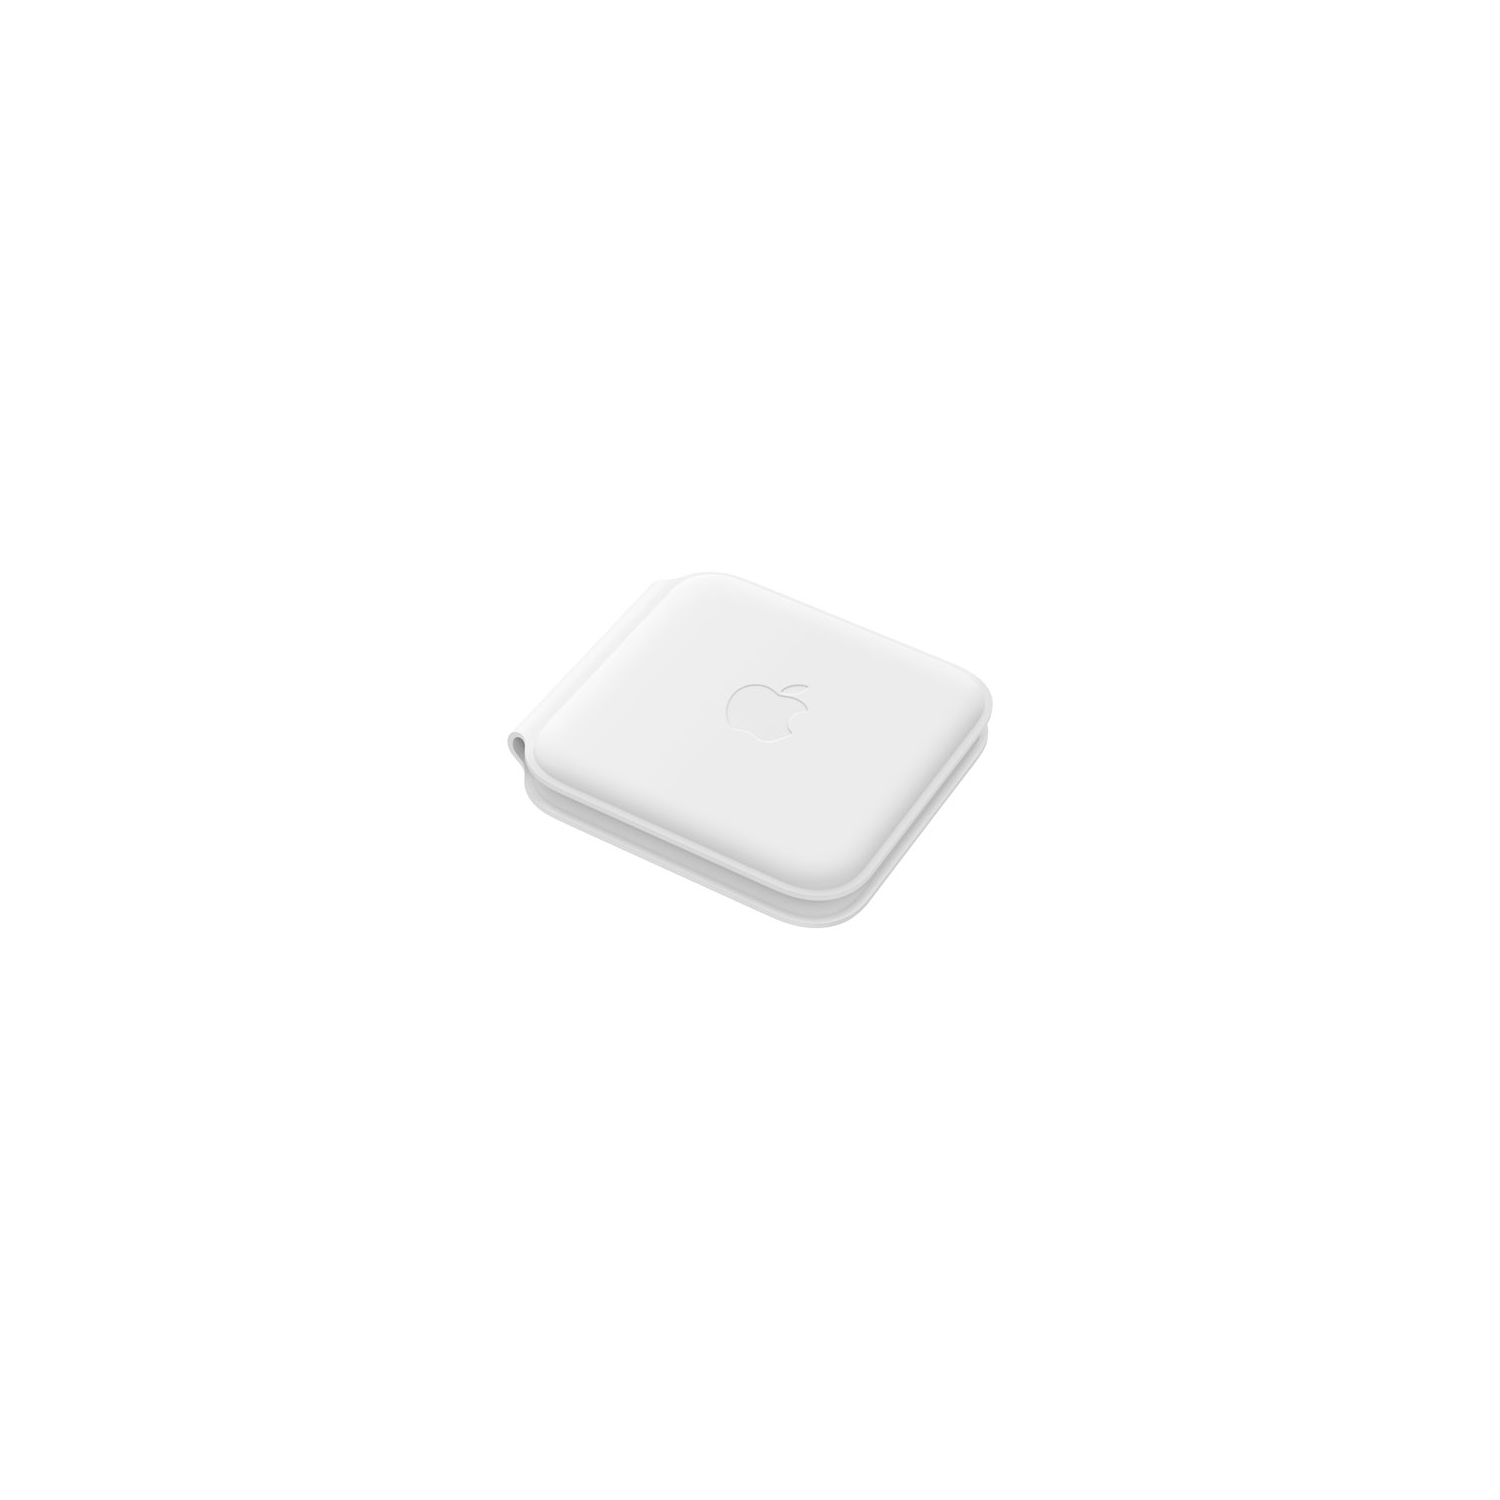 Refurbished (Good) Apple MagSafe Duo Wireless Charger - White OEM 